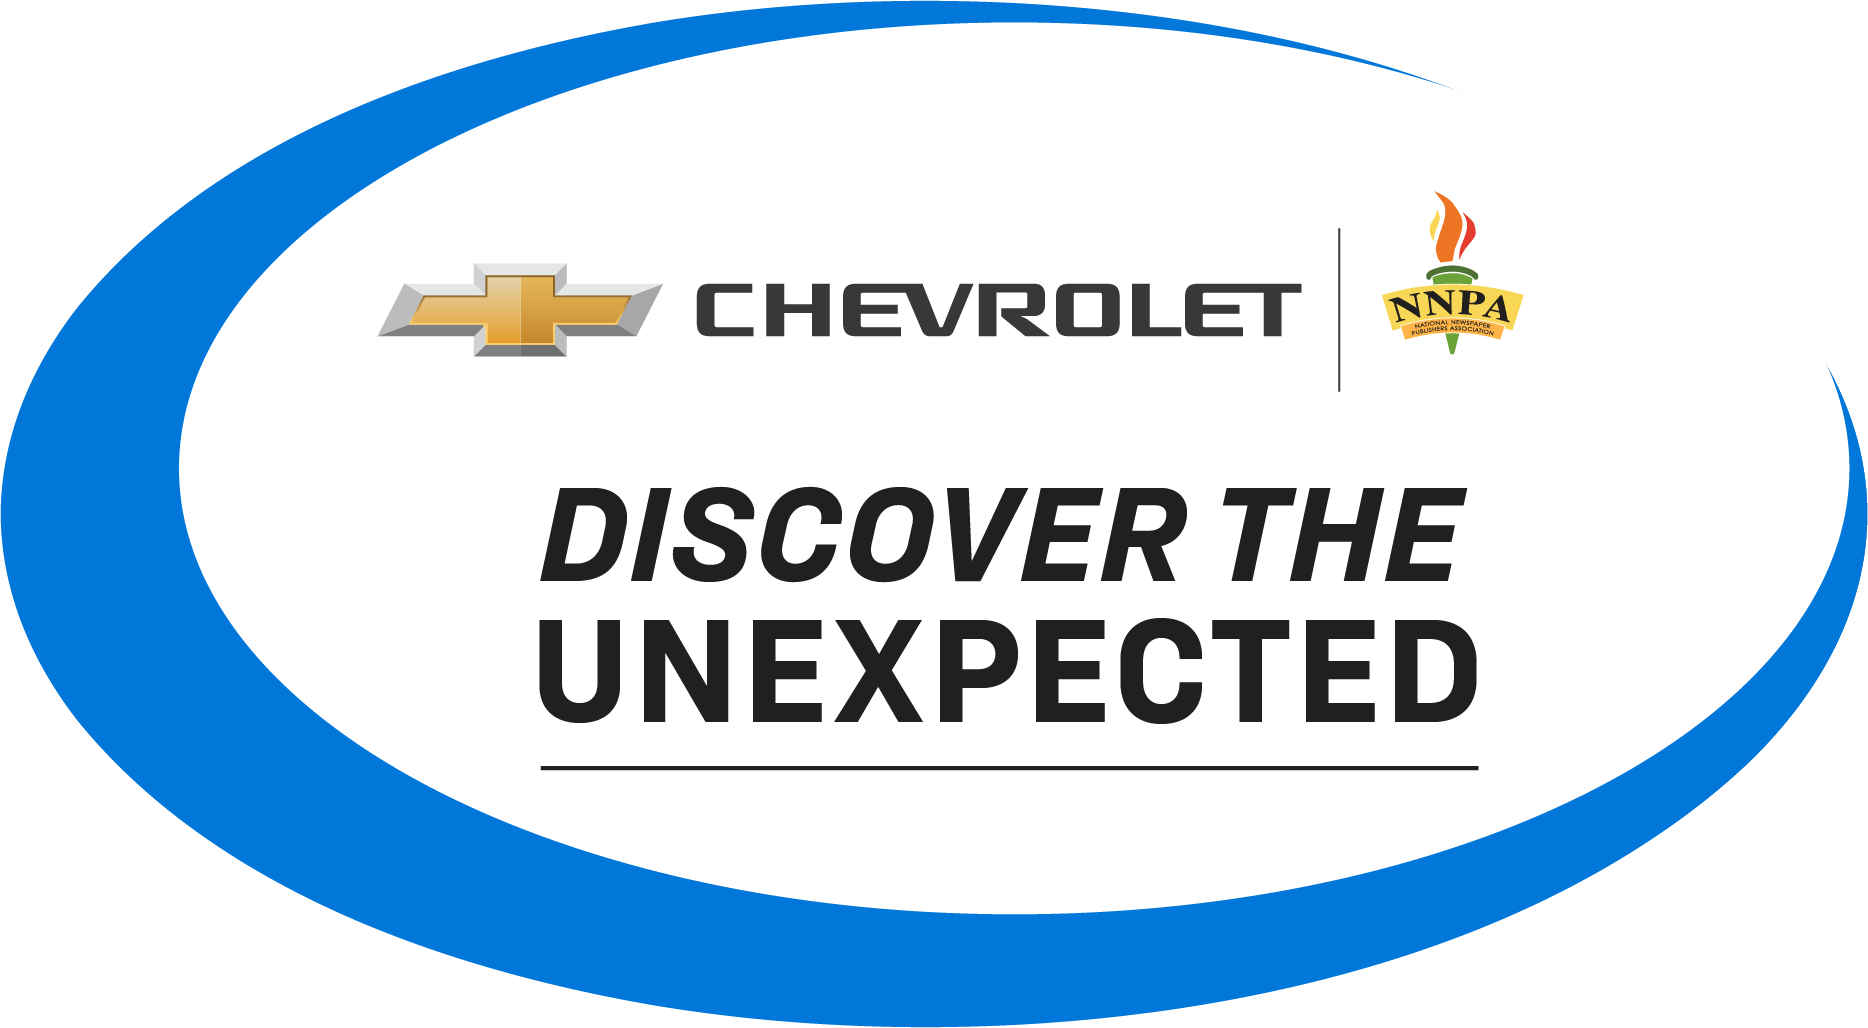 NNPA | Chevrolet Discover the Unexpected